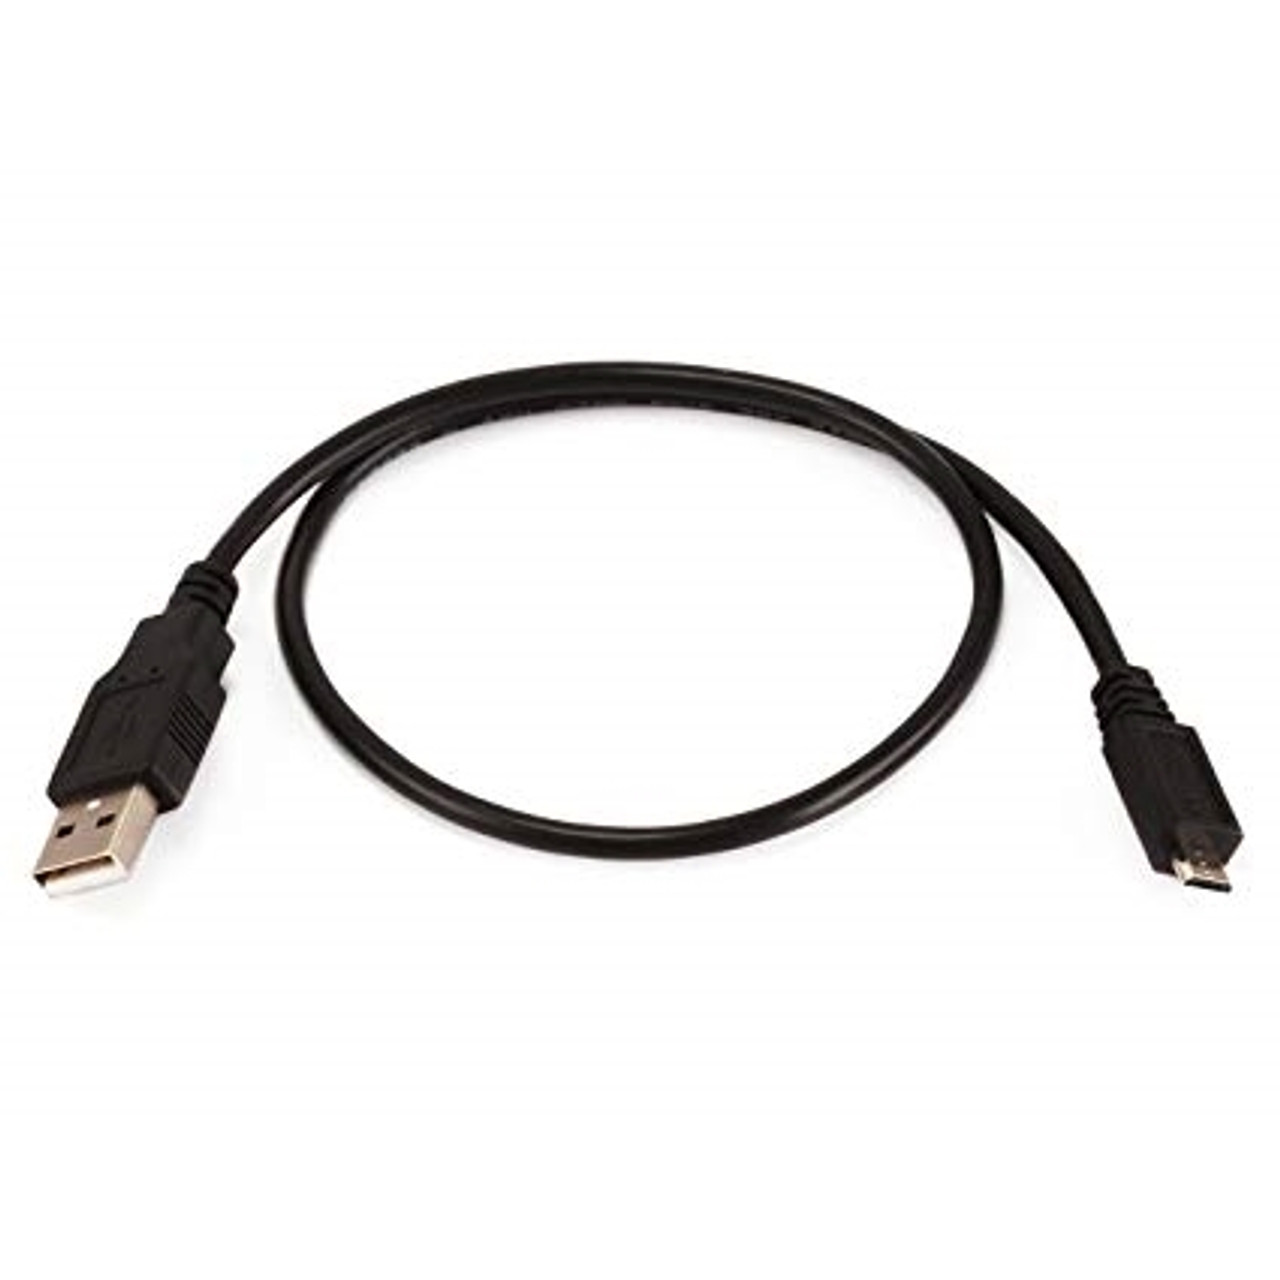 Voorstad supermarkt Malawi USB Cable, A To Micro B, 45cm, Black